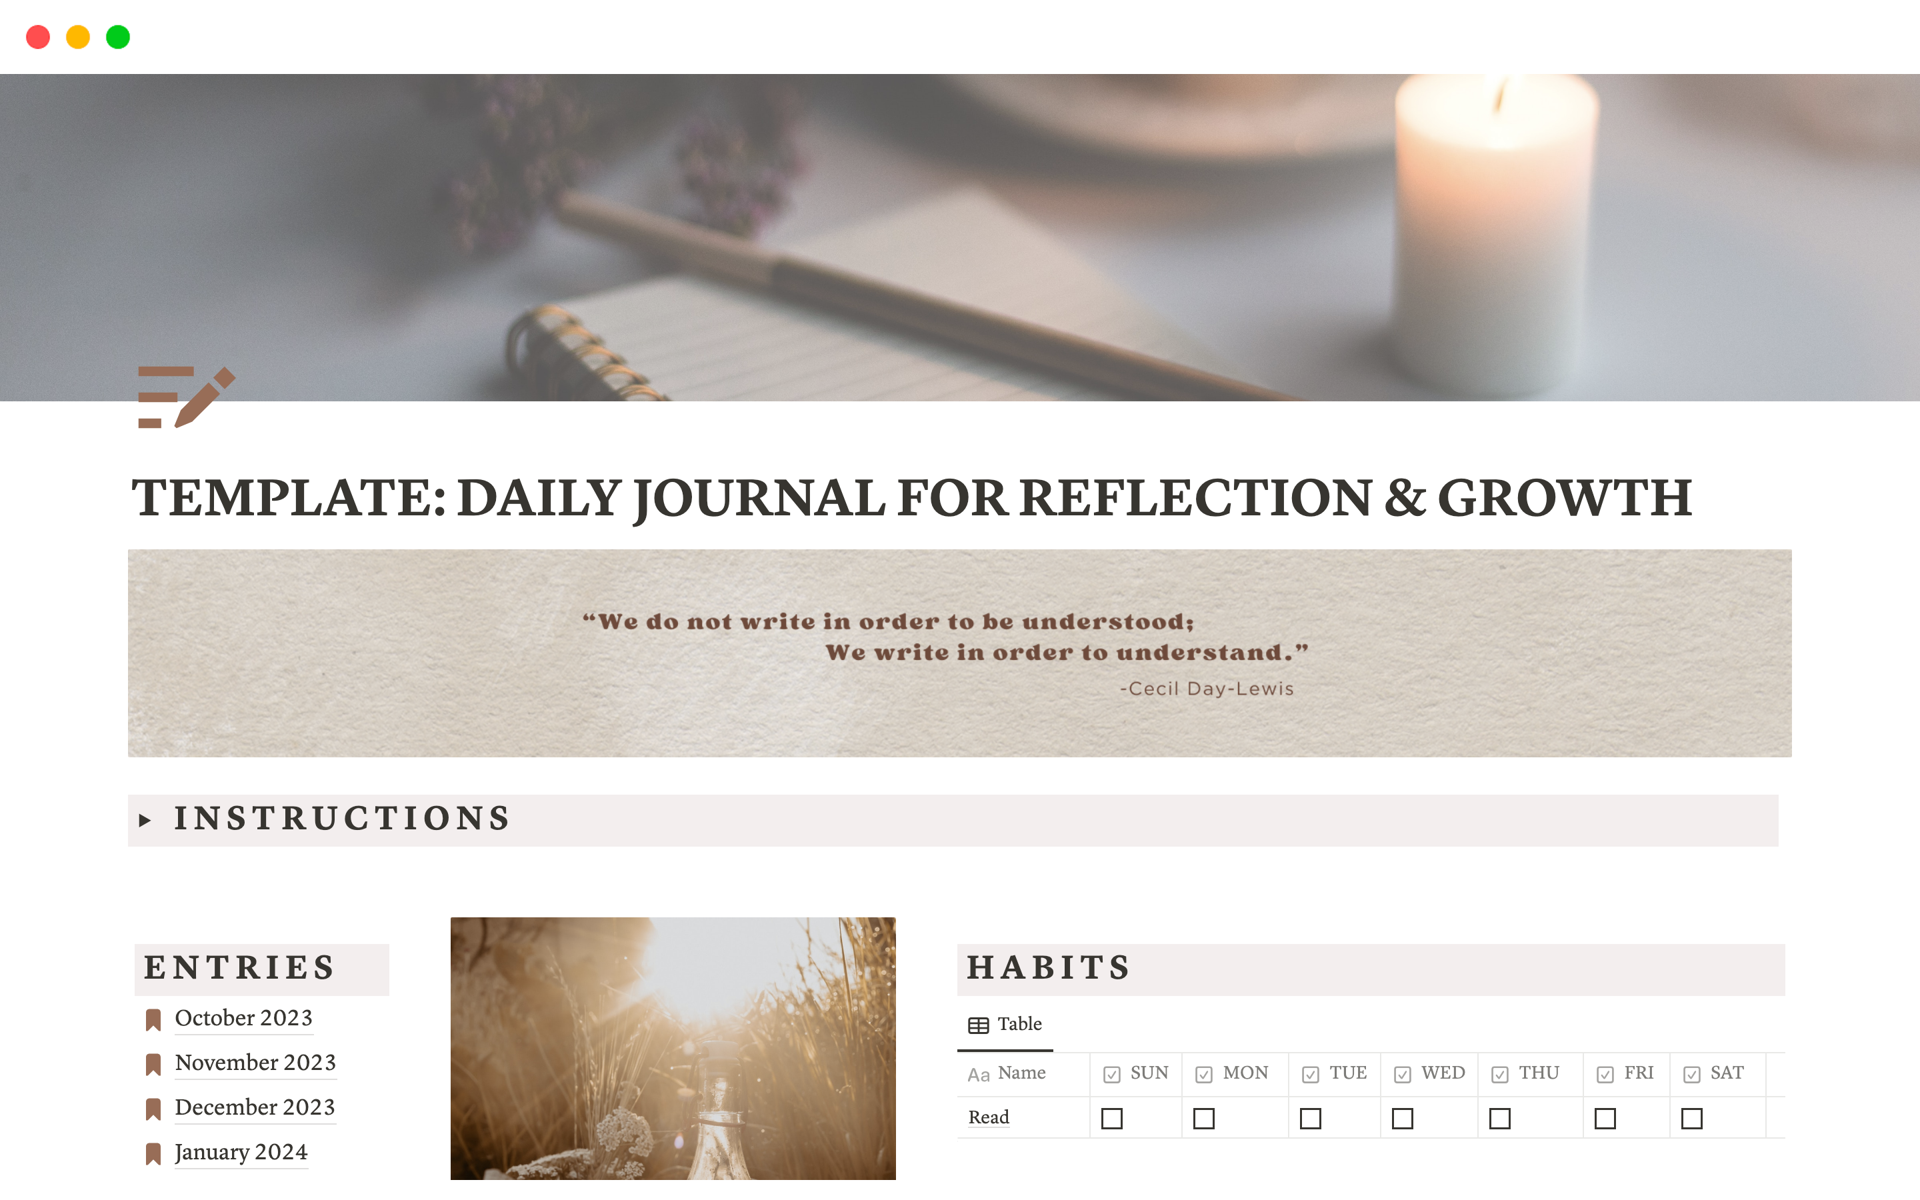 DAILY JOURNAL FOR REFLECTION & GROWTHのテンプレートのプレビュー